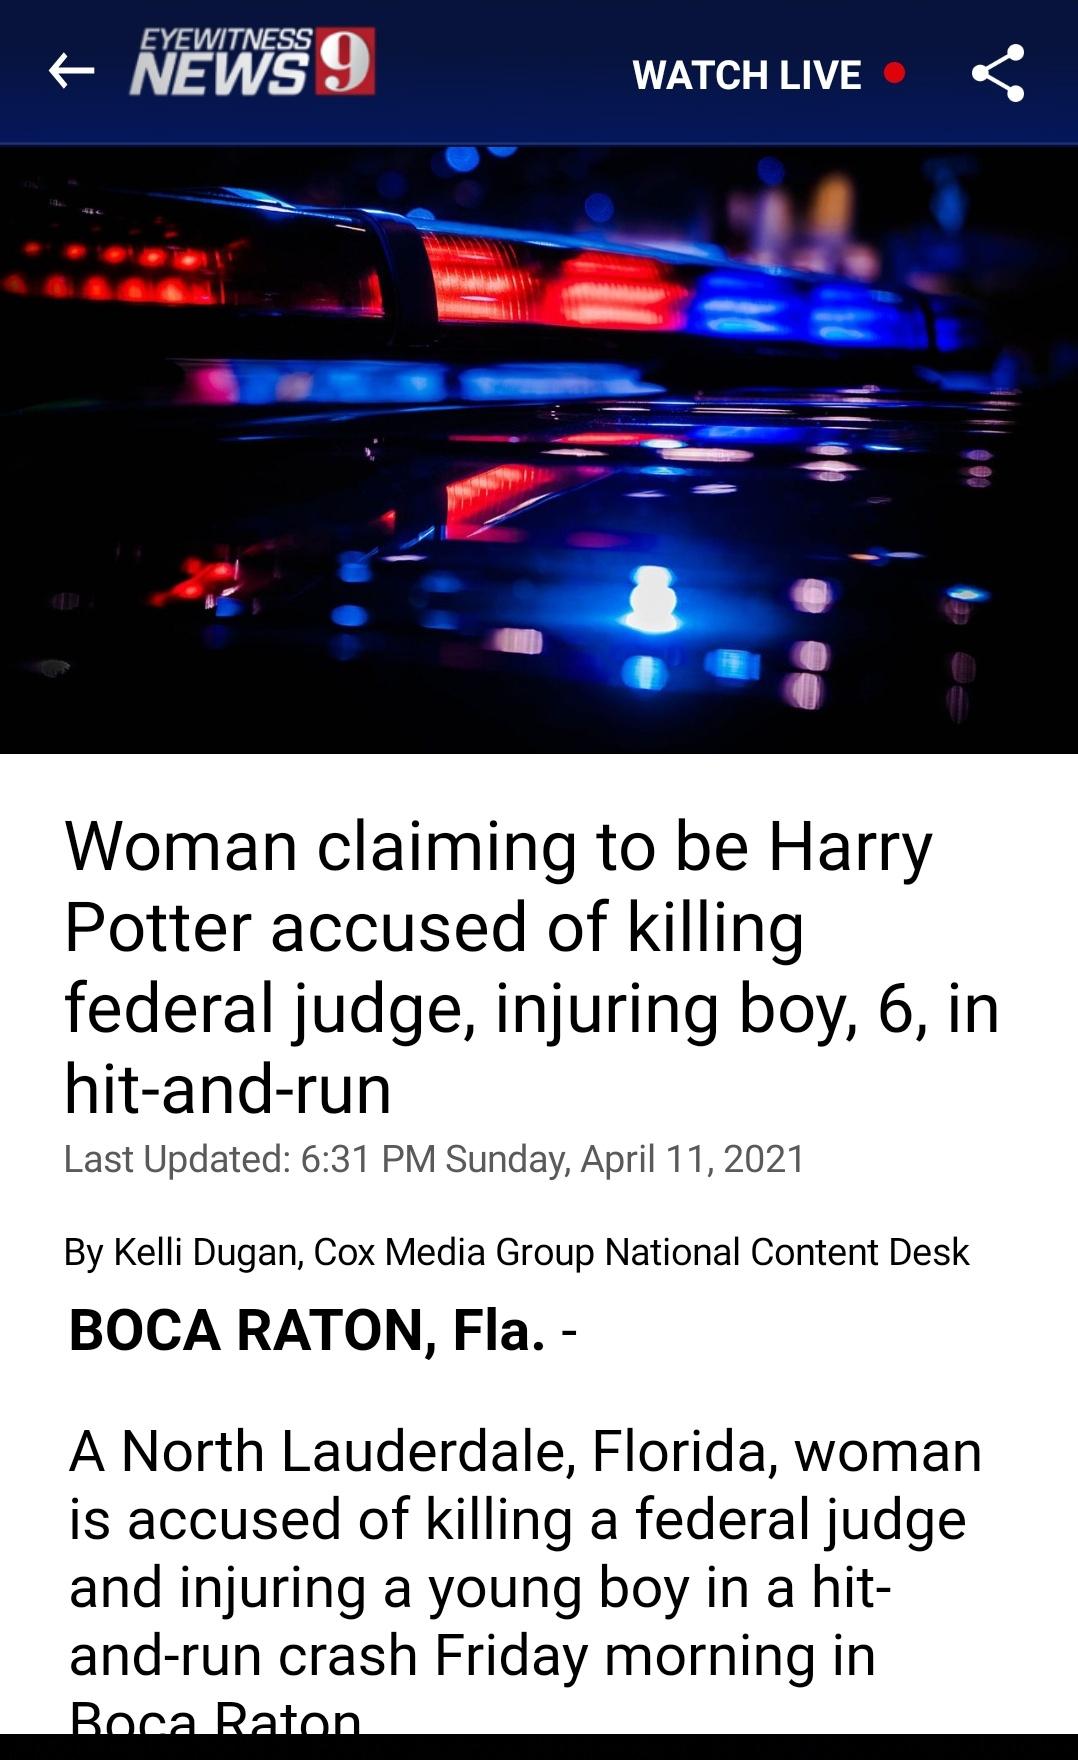 Florida Man Being Upstaged By Florida Lady